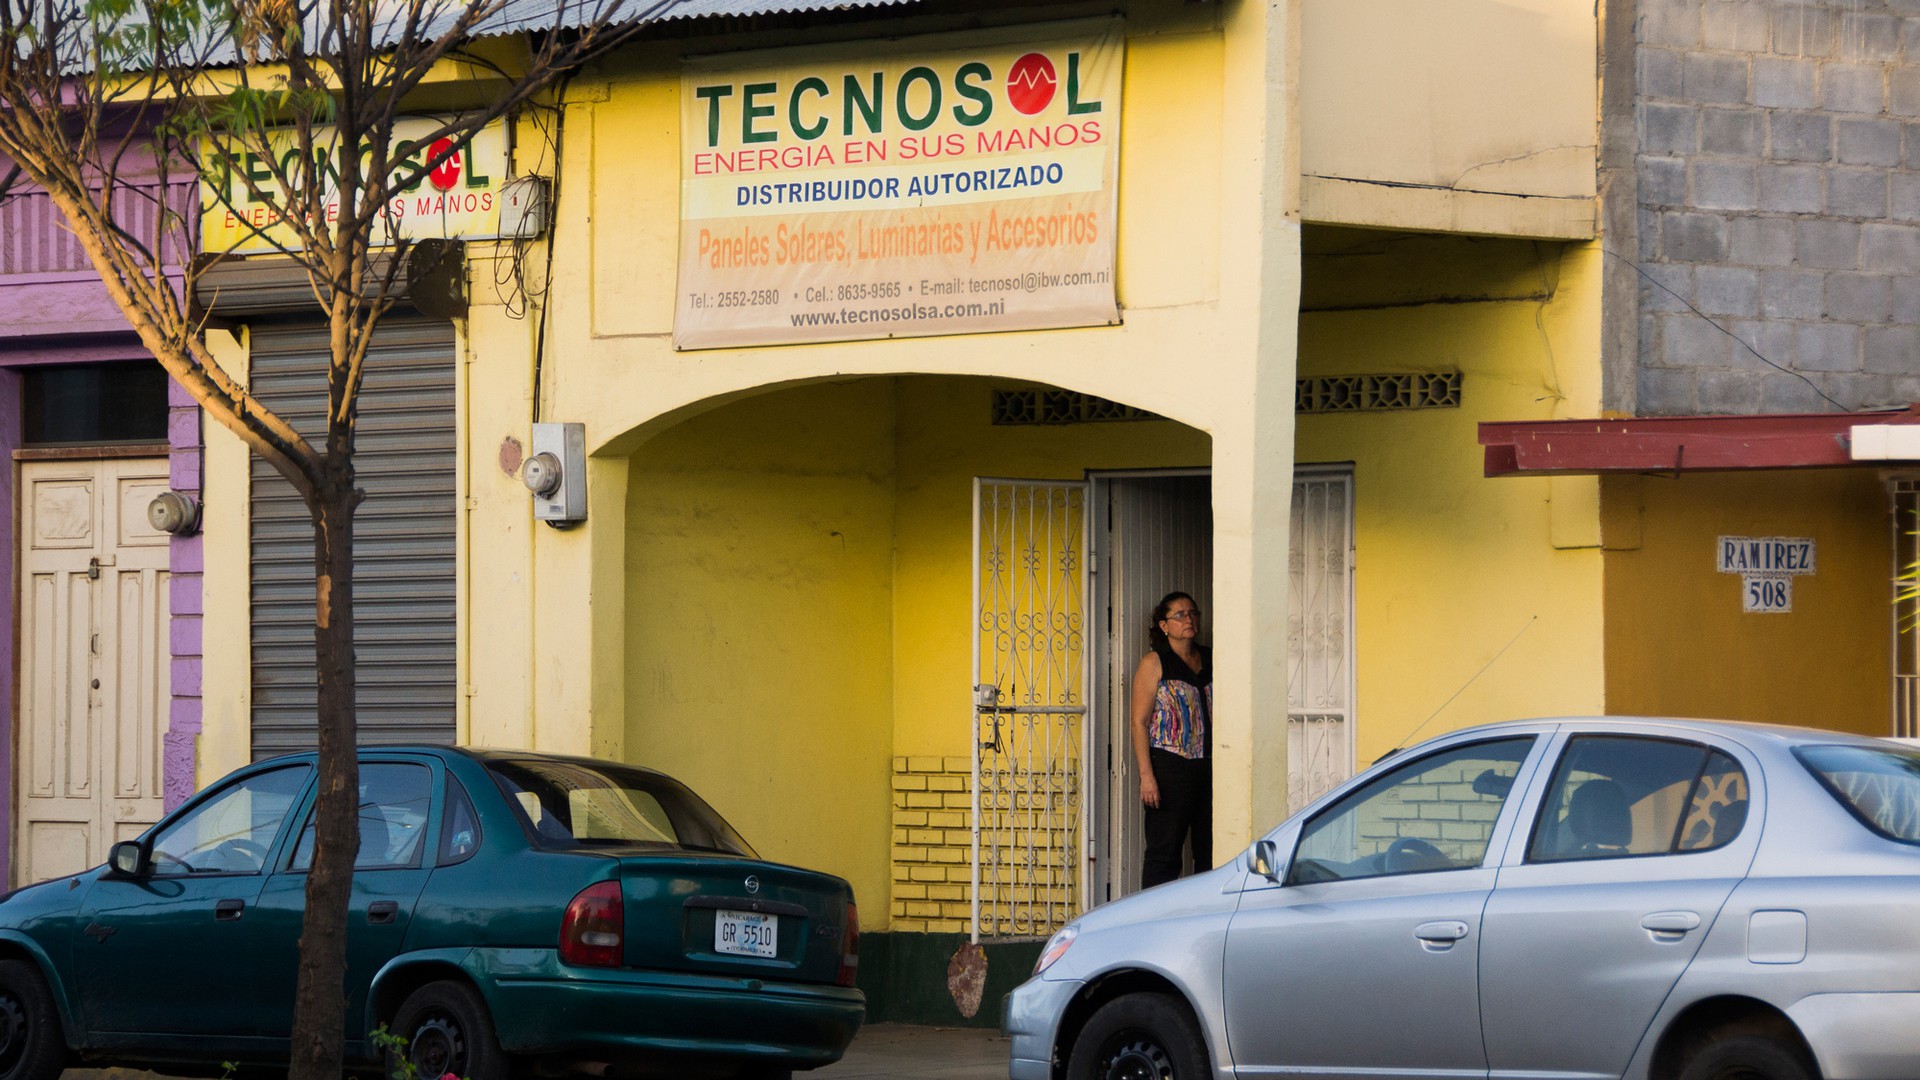 Veronica Delagneau Barquero stands in the doorway of the Tecnosol location in Granada, Nicaragua, on March 12, 2015. The privately owned company has worked to bring solar energy to rural areas and has more recently expanded to an urban market. (Danika Worthington)